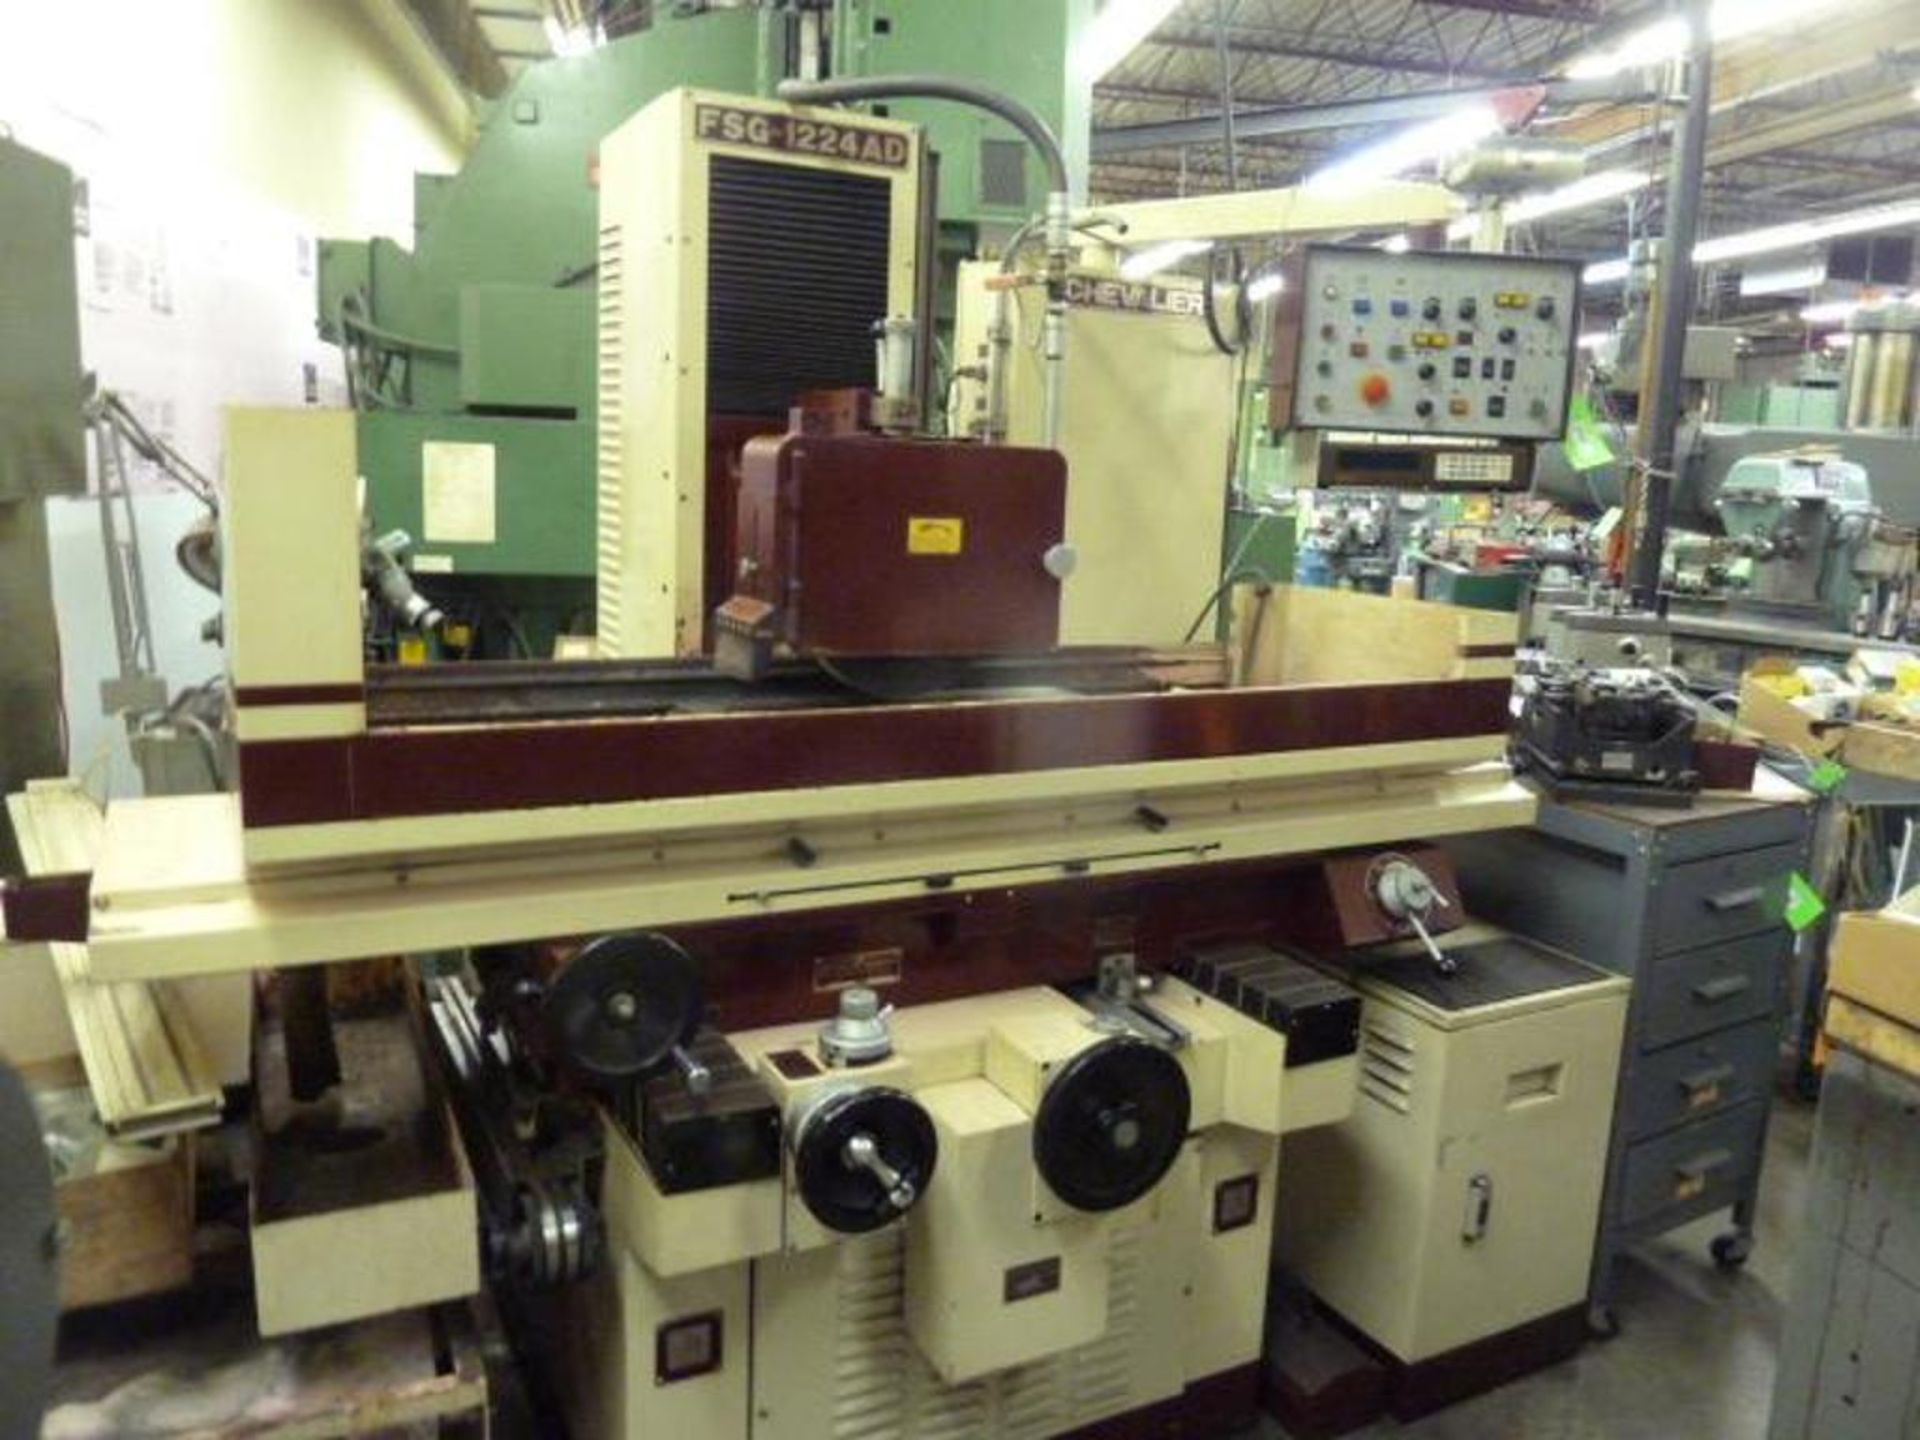 Chevalier Model 1224AD Hydraulic Surface Grinder, 12" x 24" Fine Line Electro-Magnetic Chu